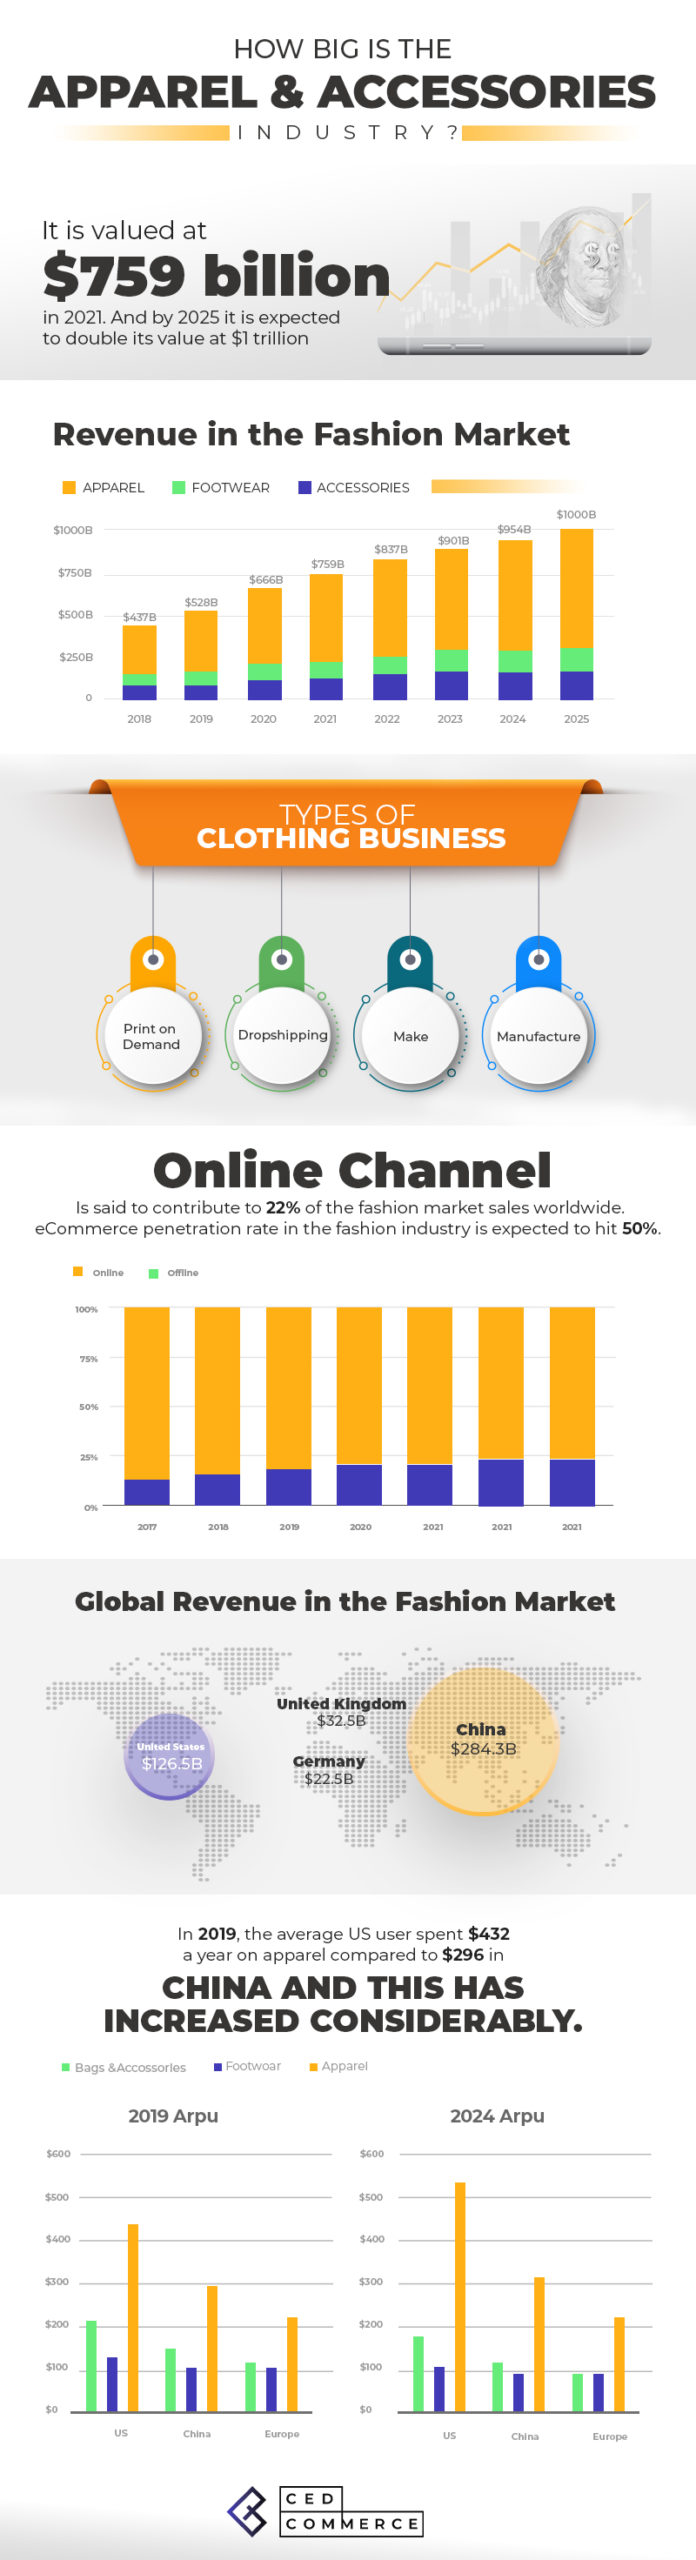 How big is apparel industry